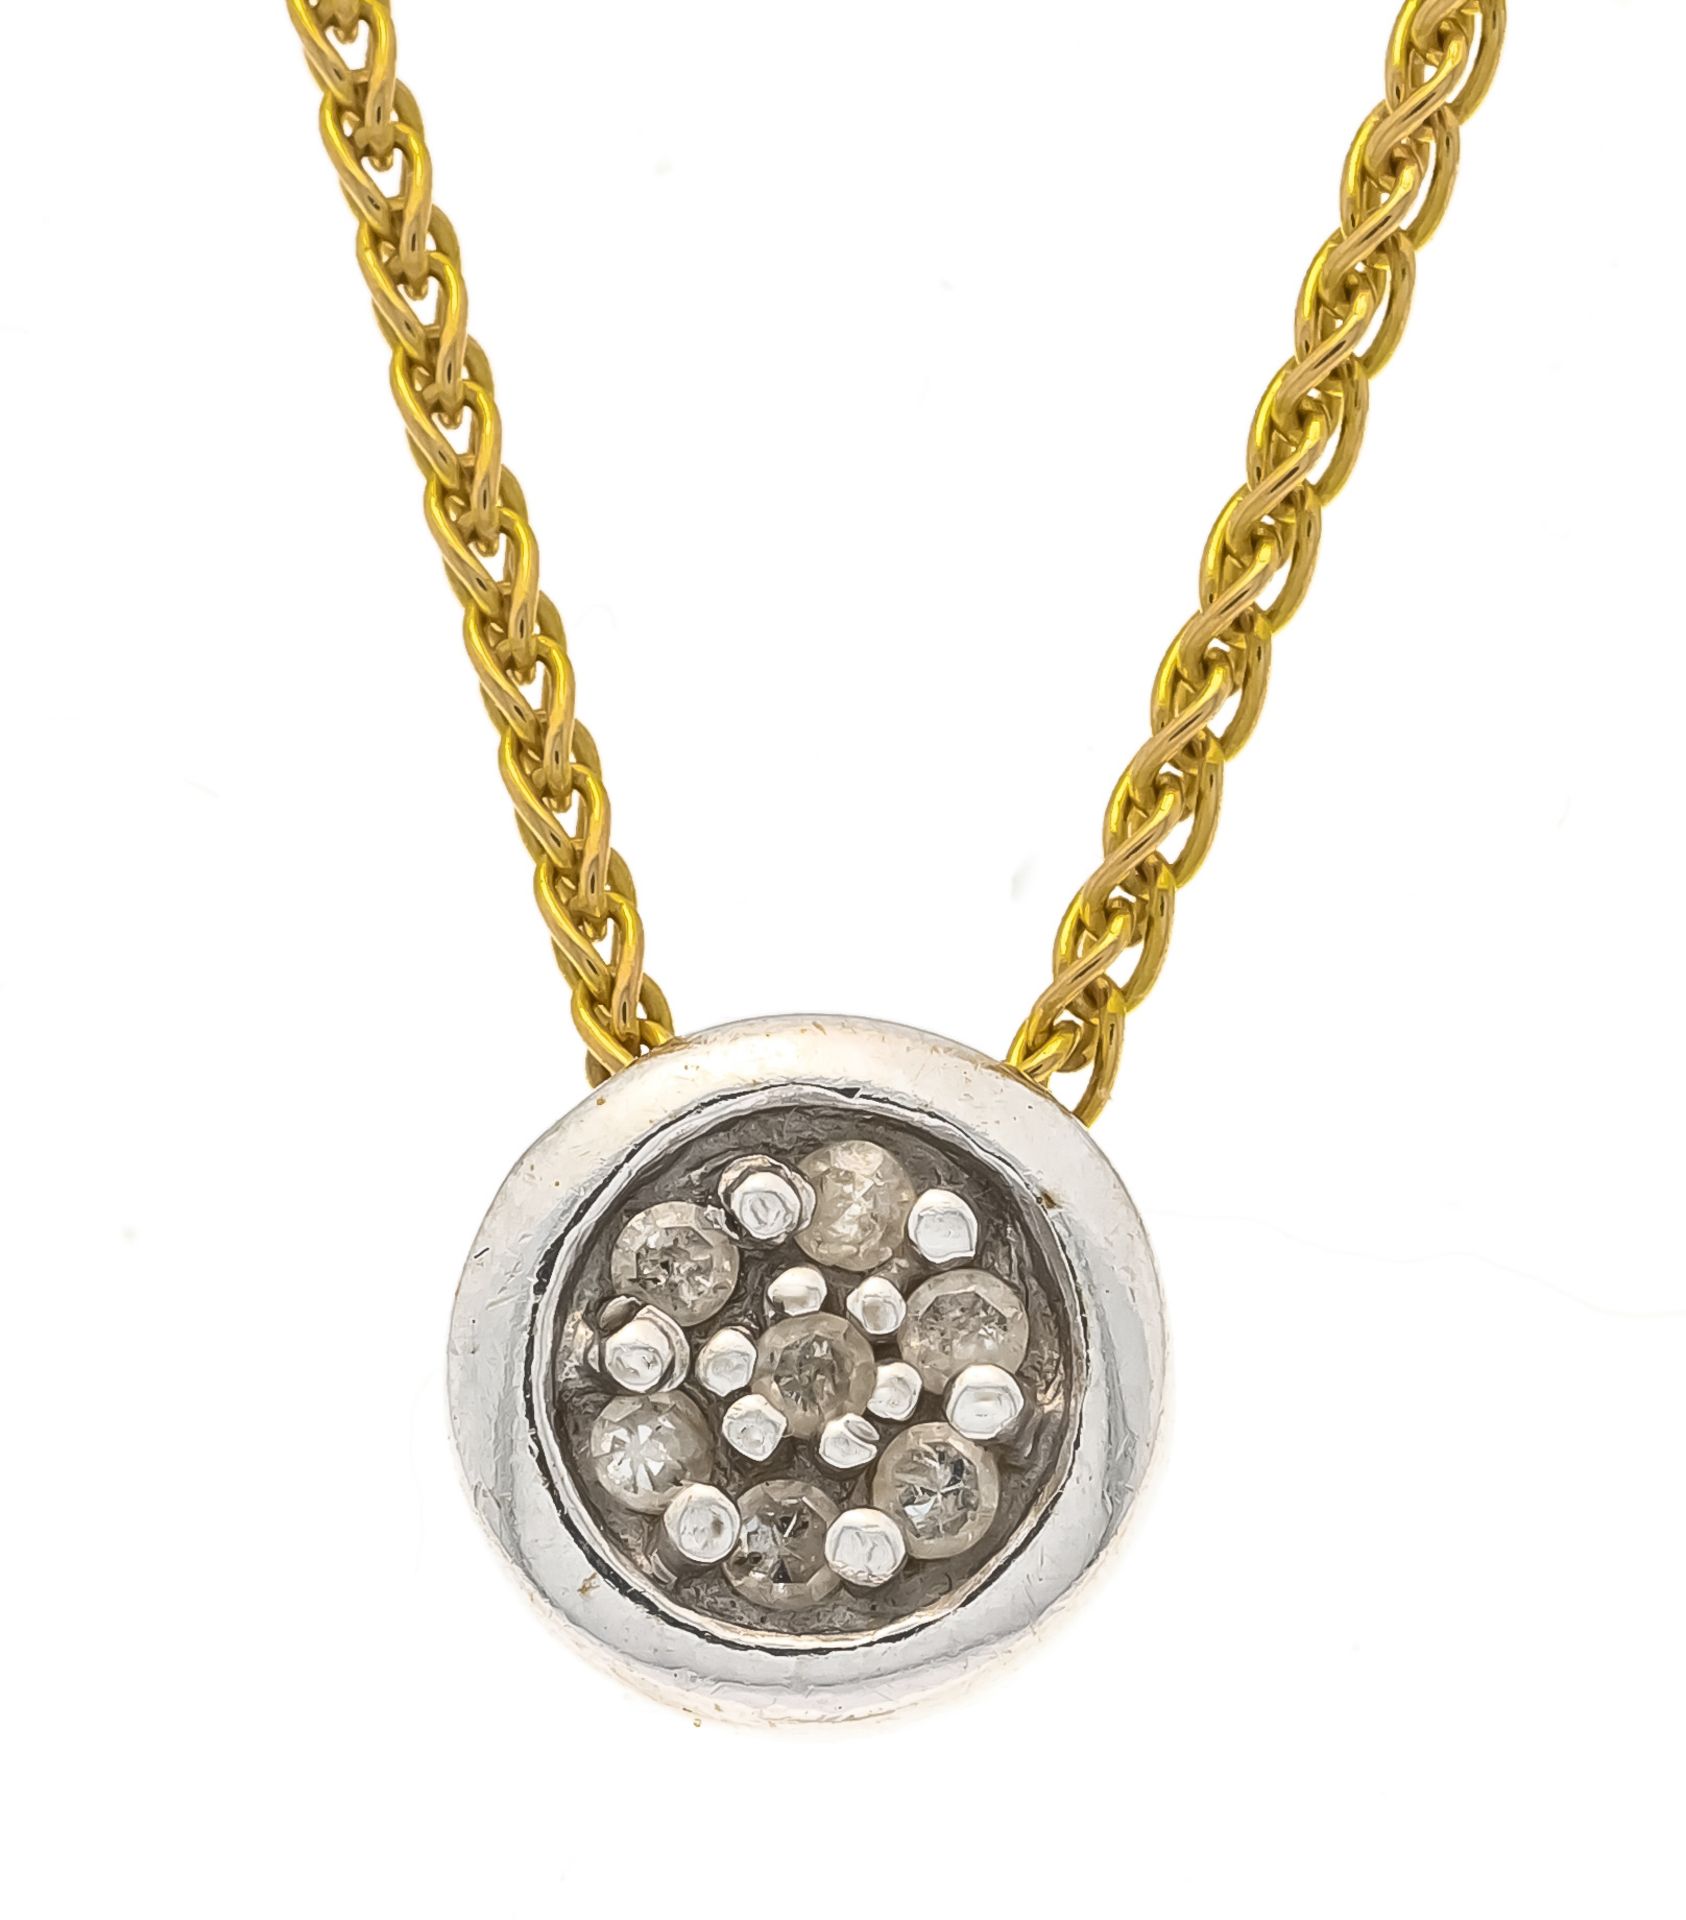 Diamond pendant WG 585/000 with 7 octagonal diamonds, total 0,04 ct tinted W/SI, d. 7 mm, on chain